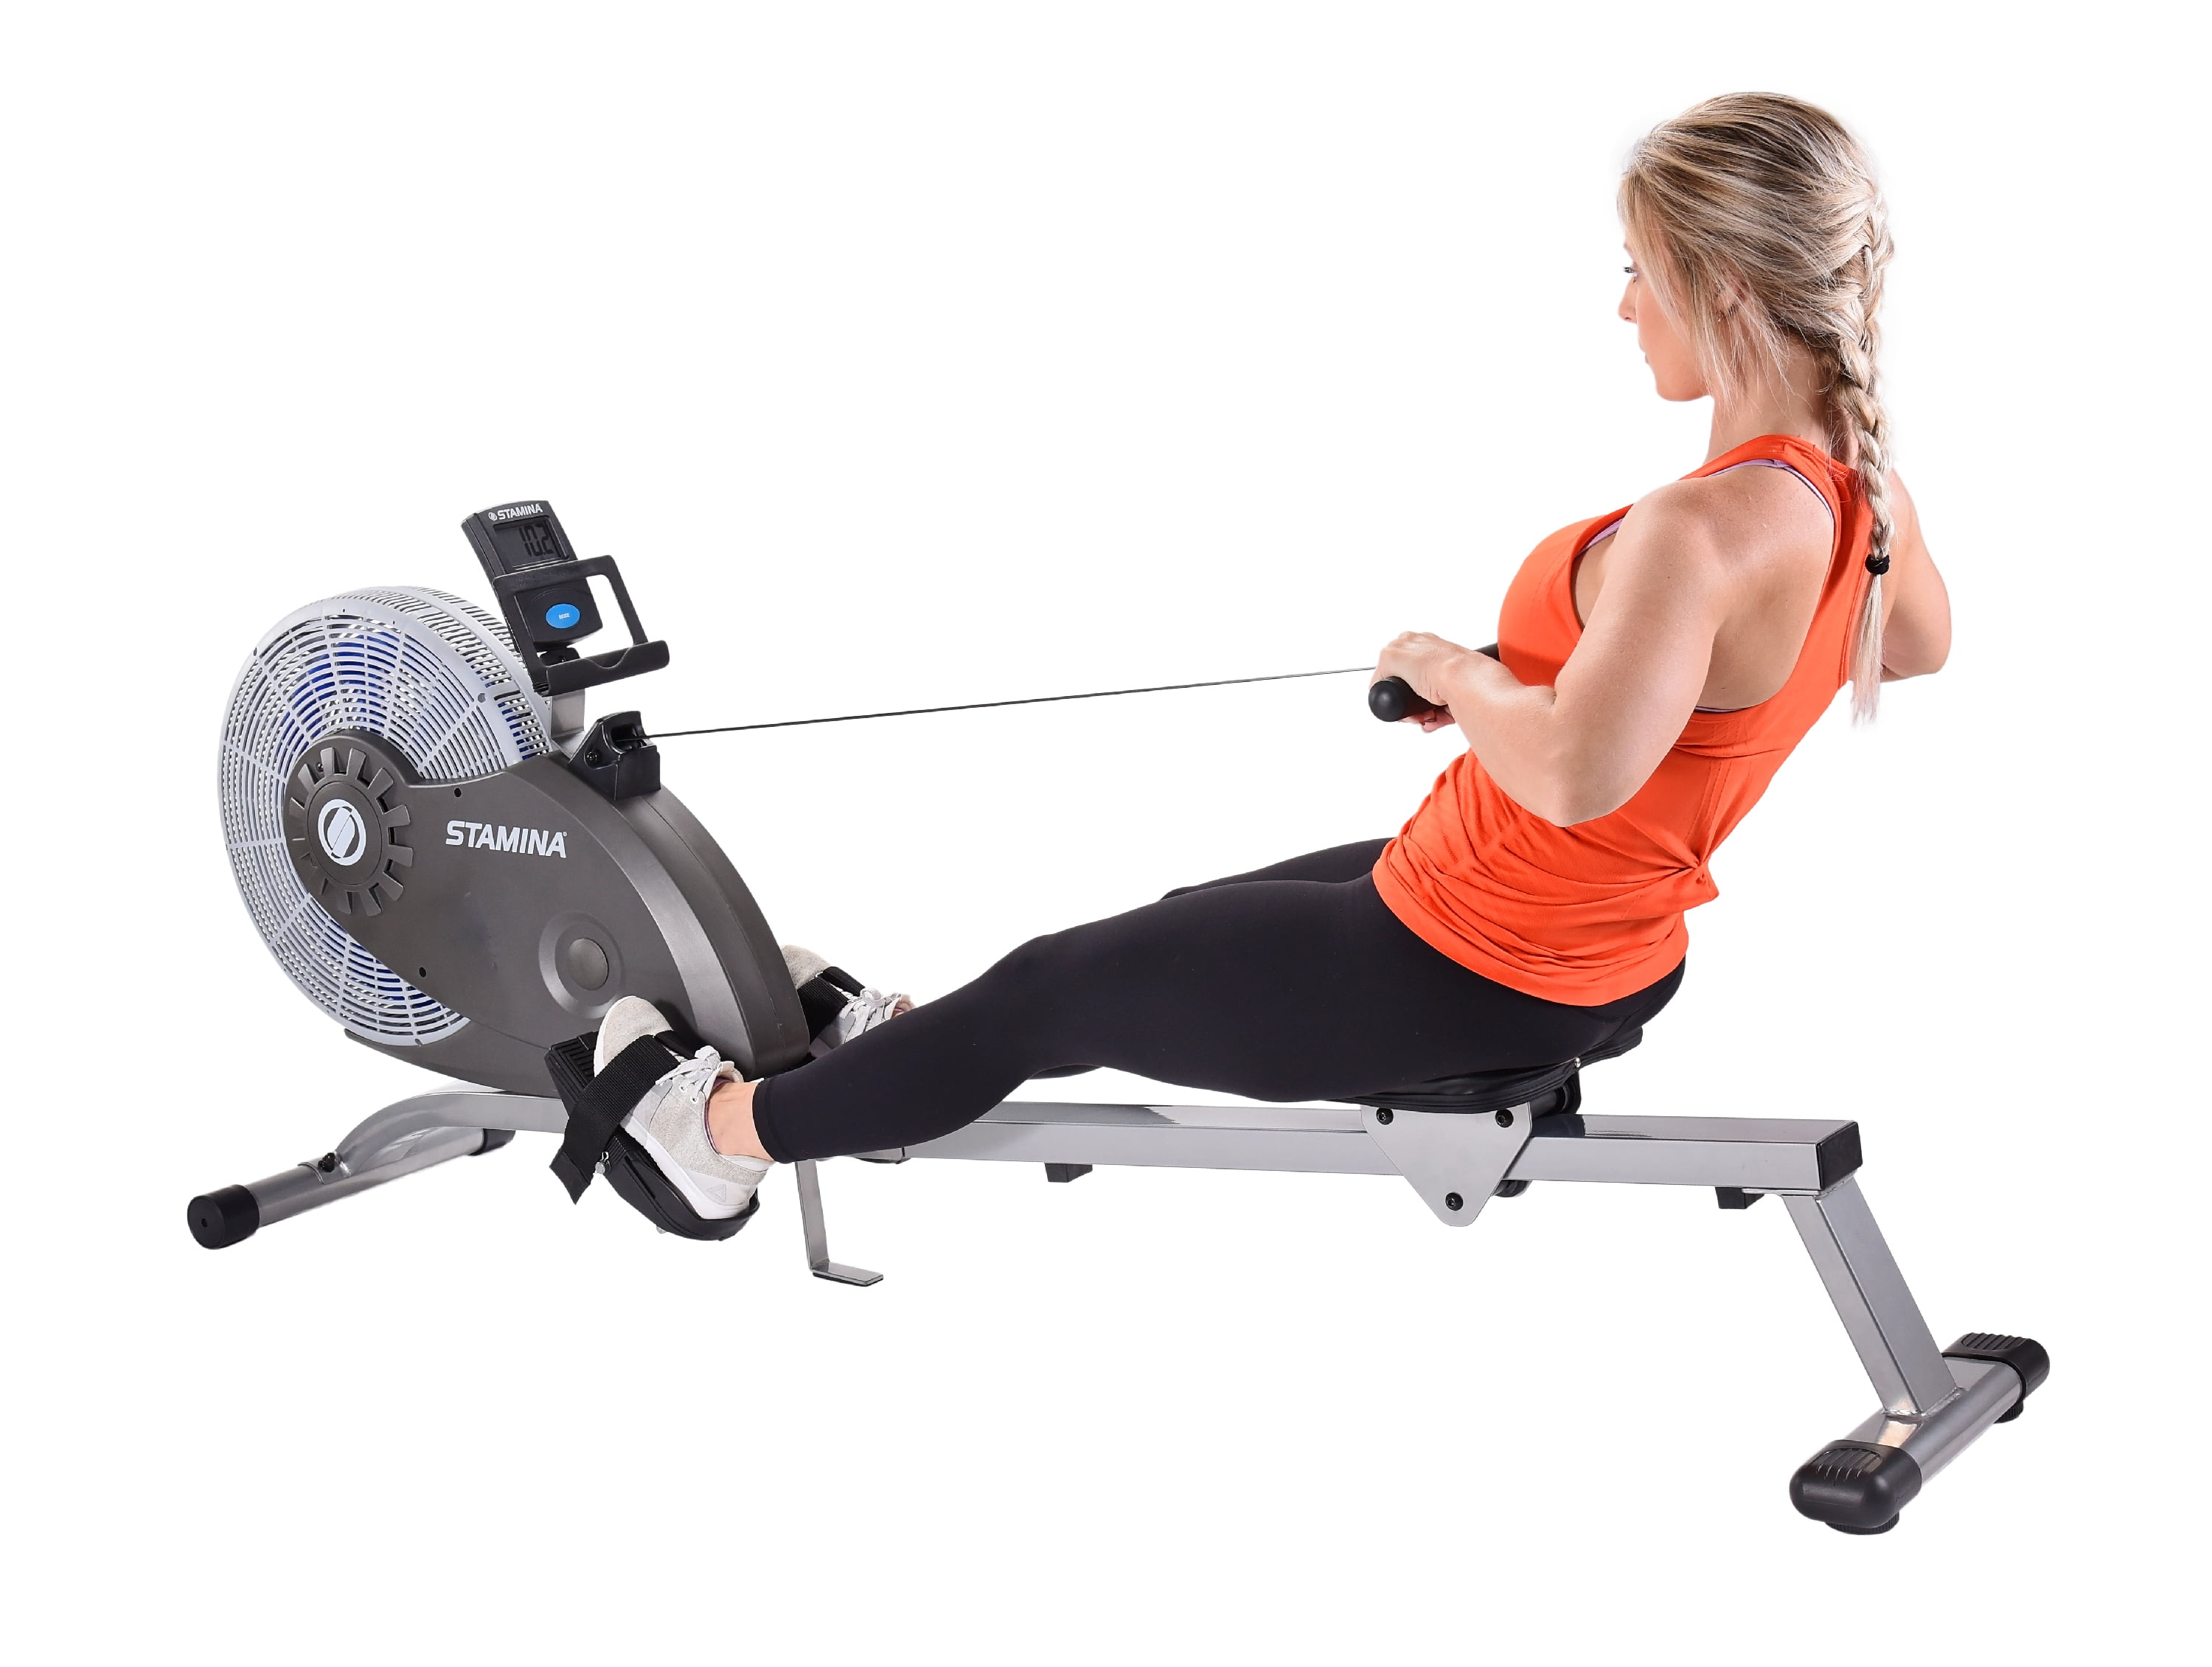 Stamina X Air Rowing Machine 35-1412 Multi-Color for sale online 